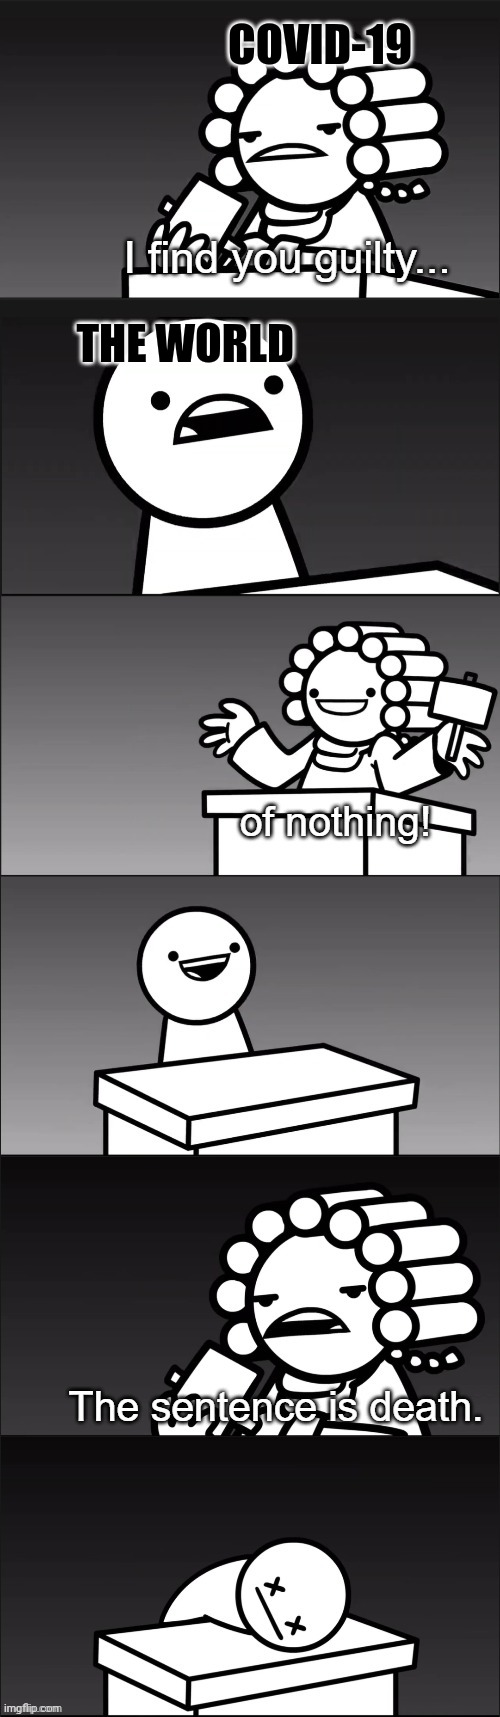 I am not wrong | COVID-19; THE WORLD | image tagged in asdfmovie i find you guilty | made w/ Imgflip meme maker